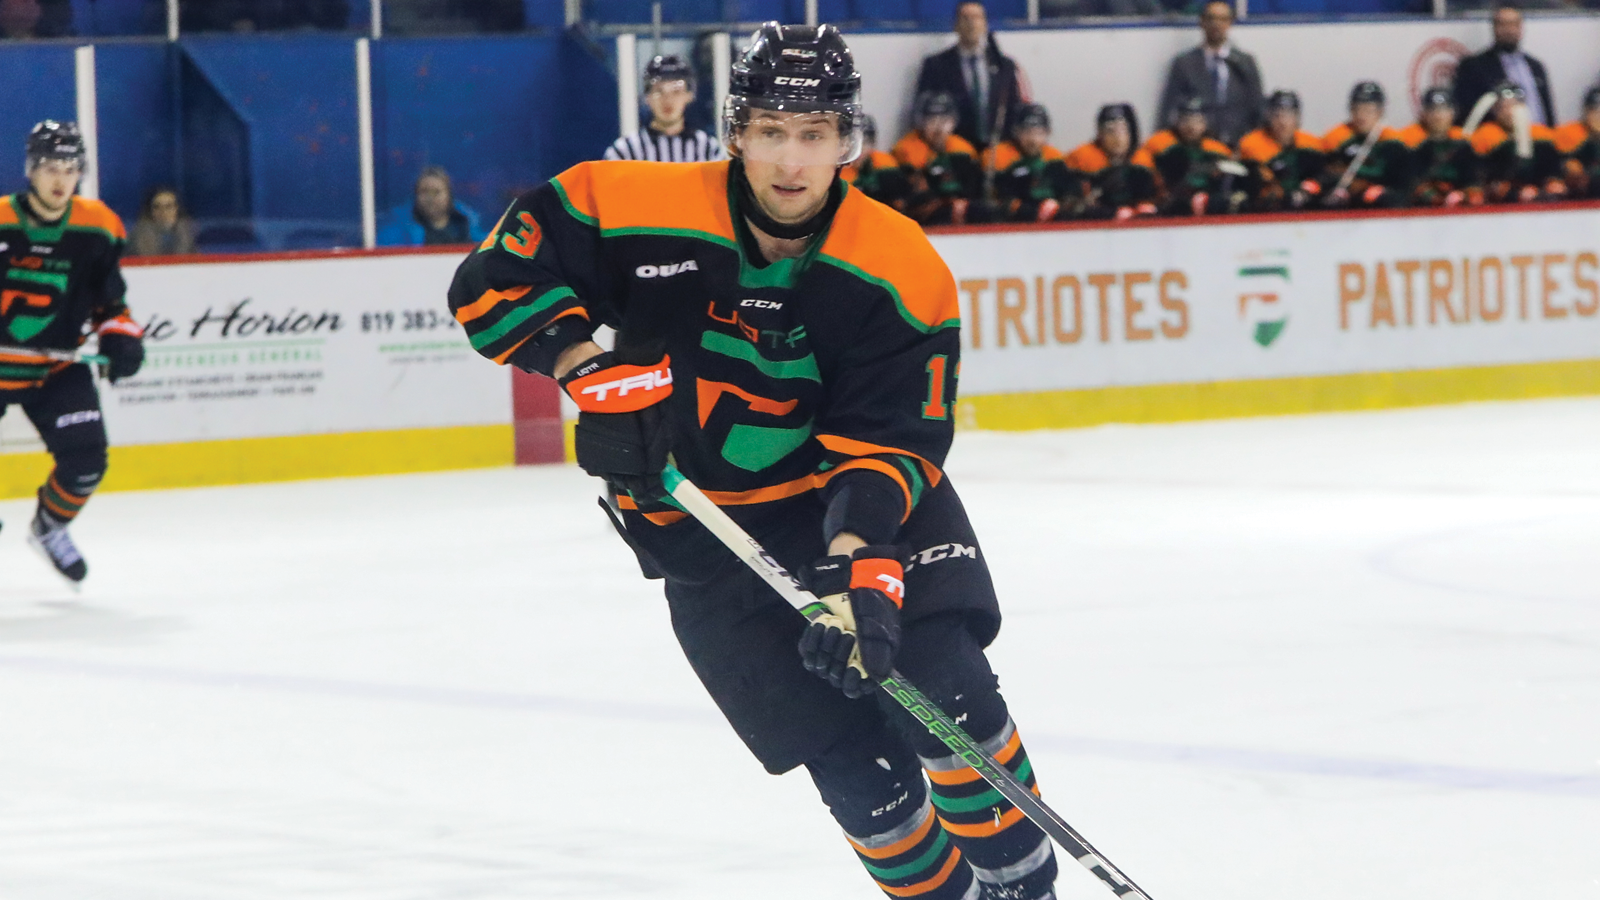 UQTR hockey player Simon Lafrance skating with the puck on his stick during a game